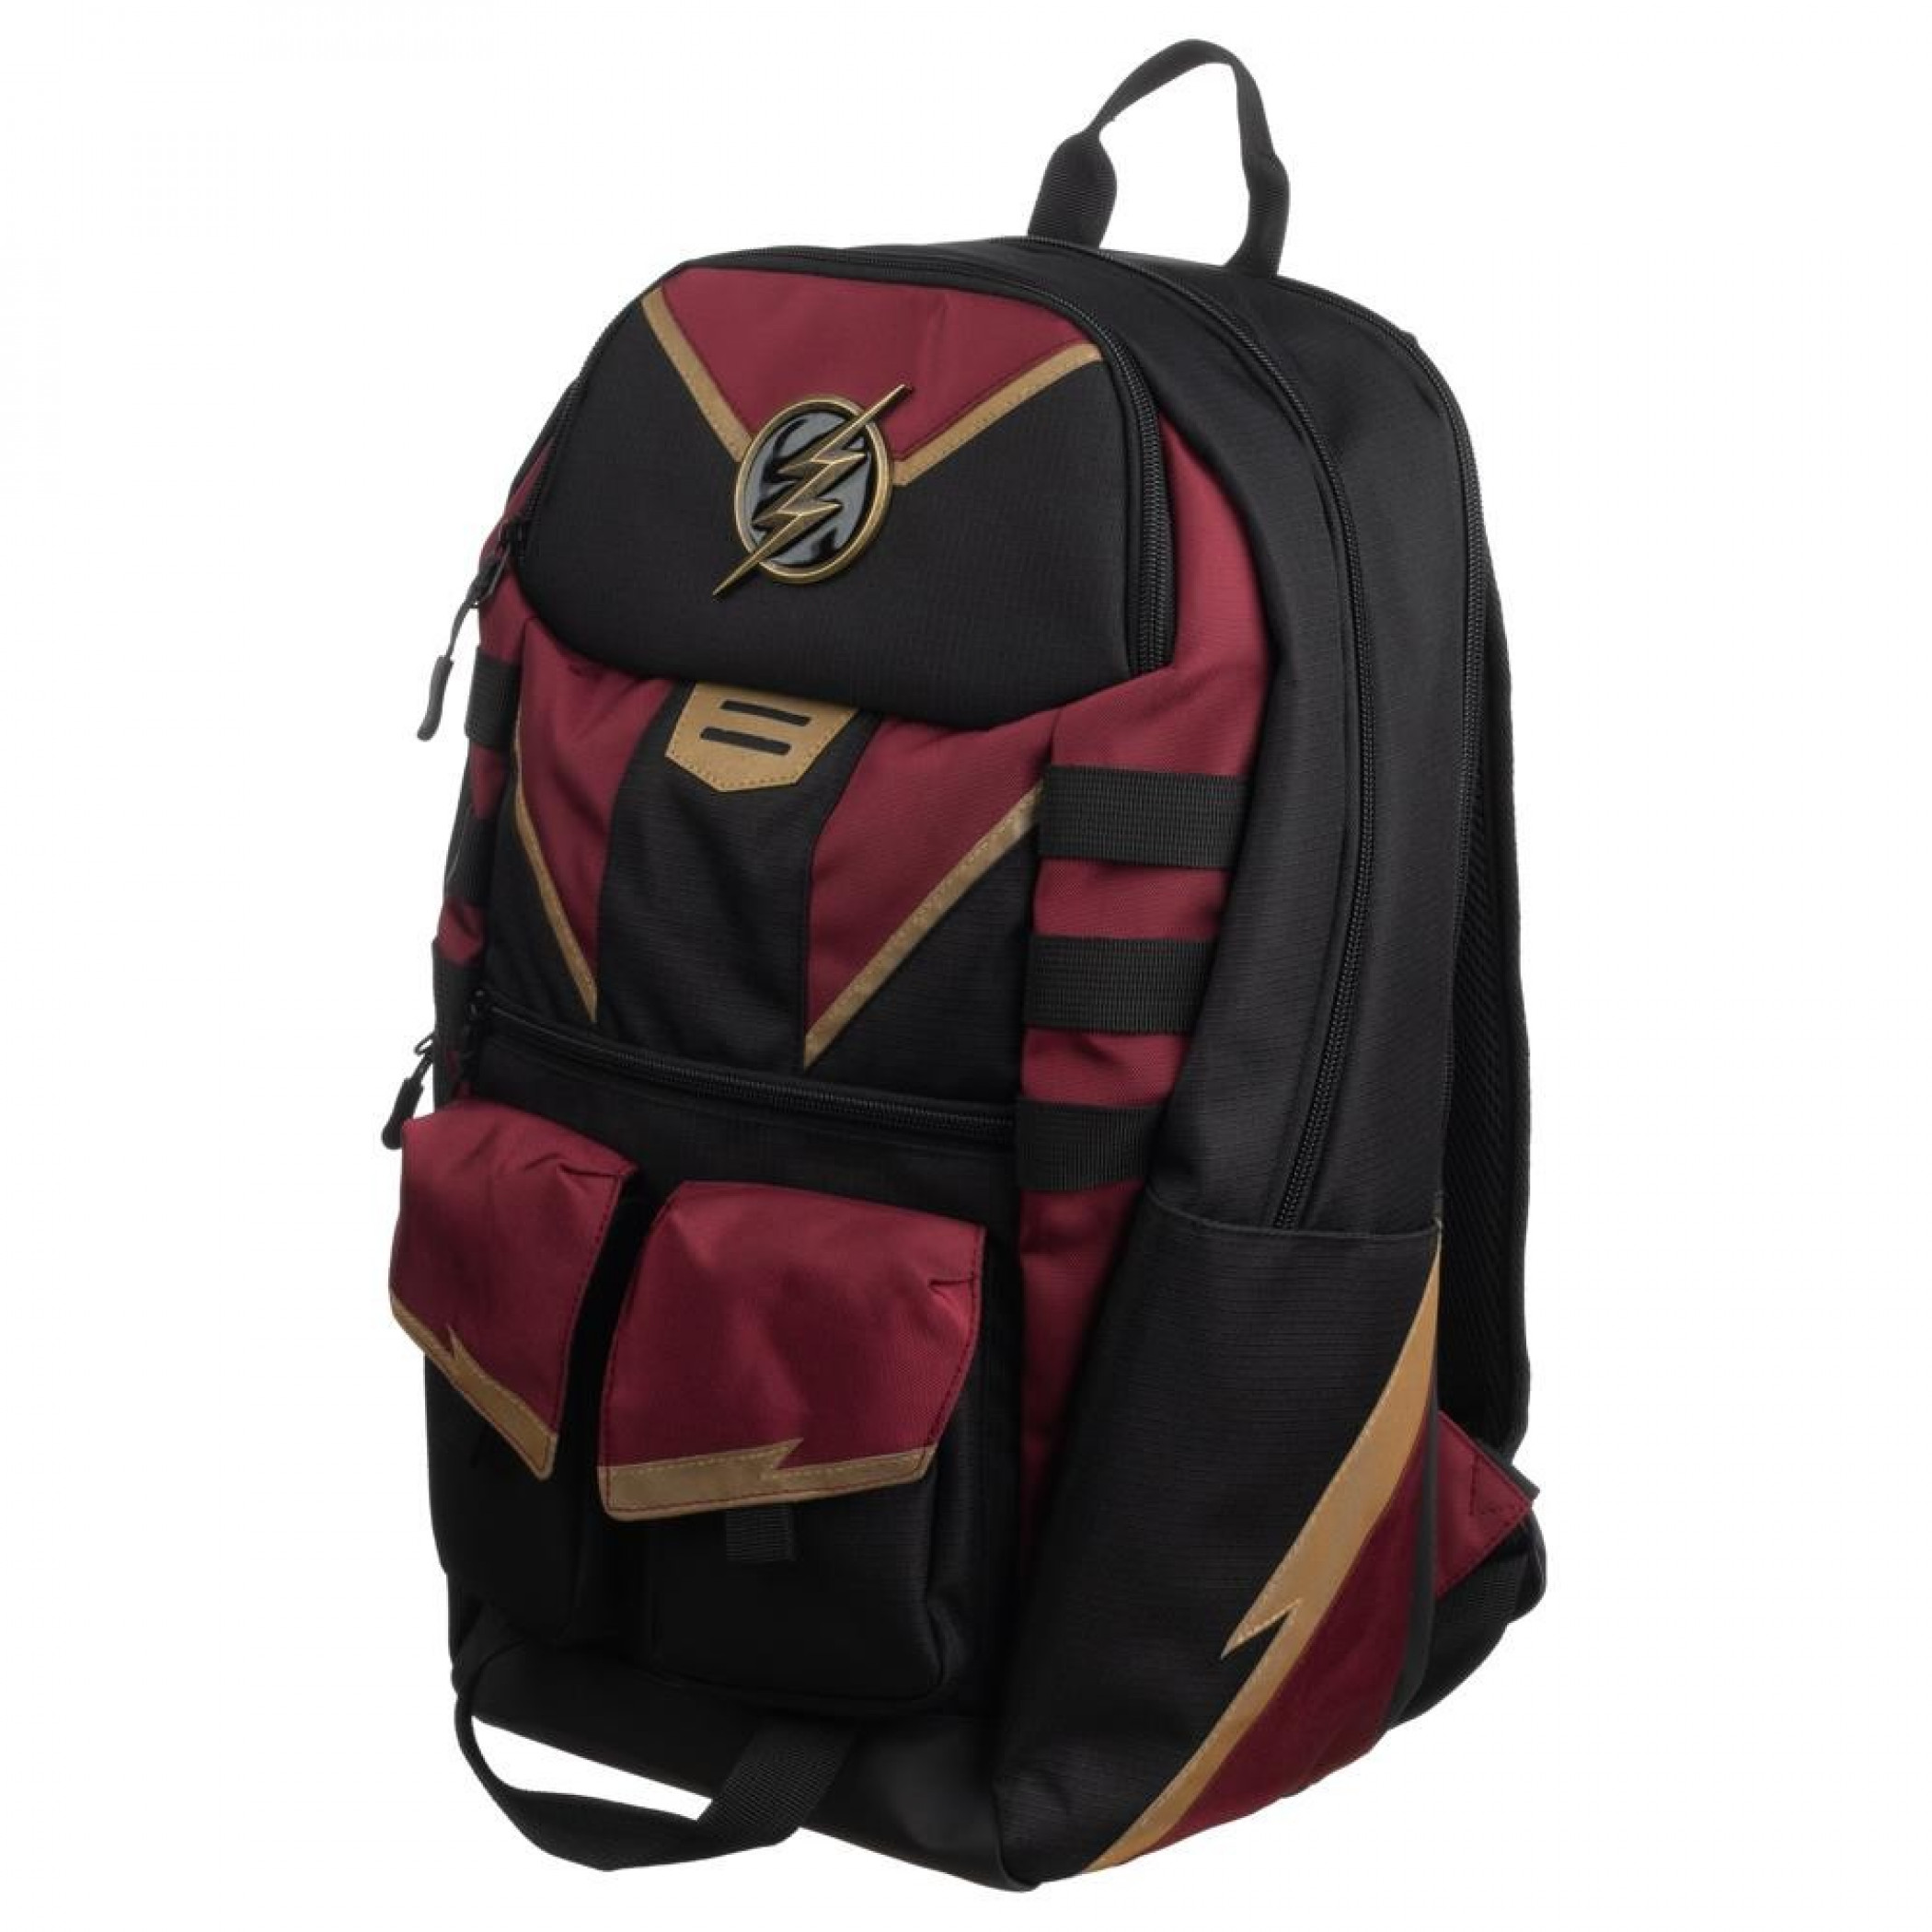 The Flash Black and Maroon Backpack